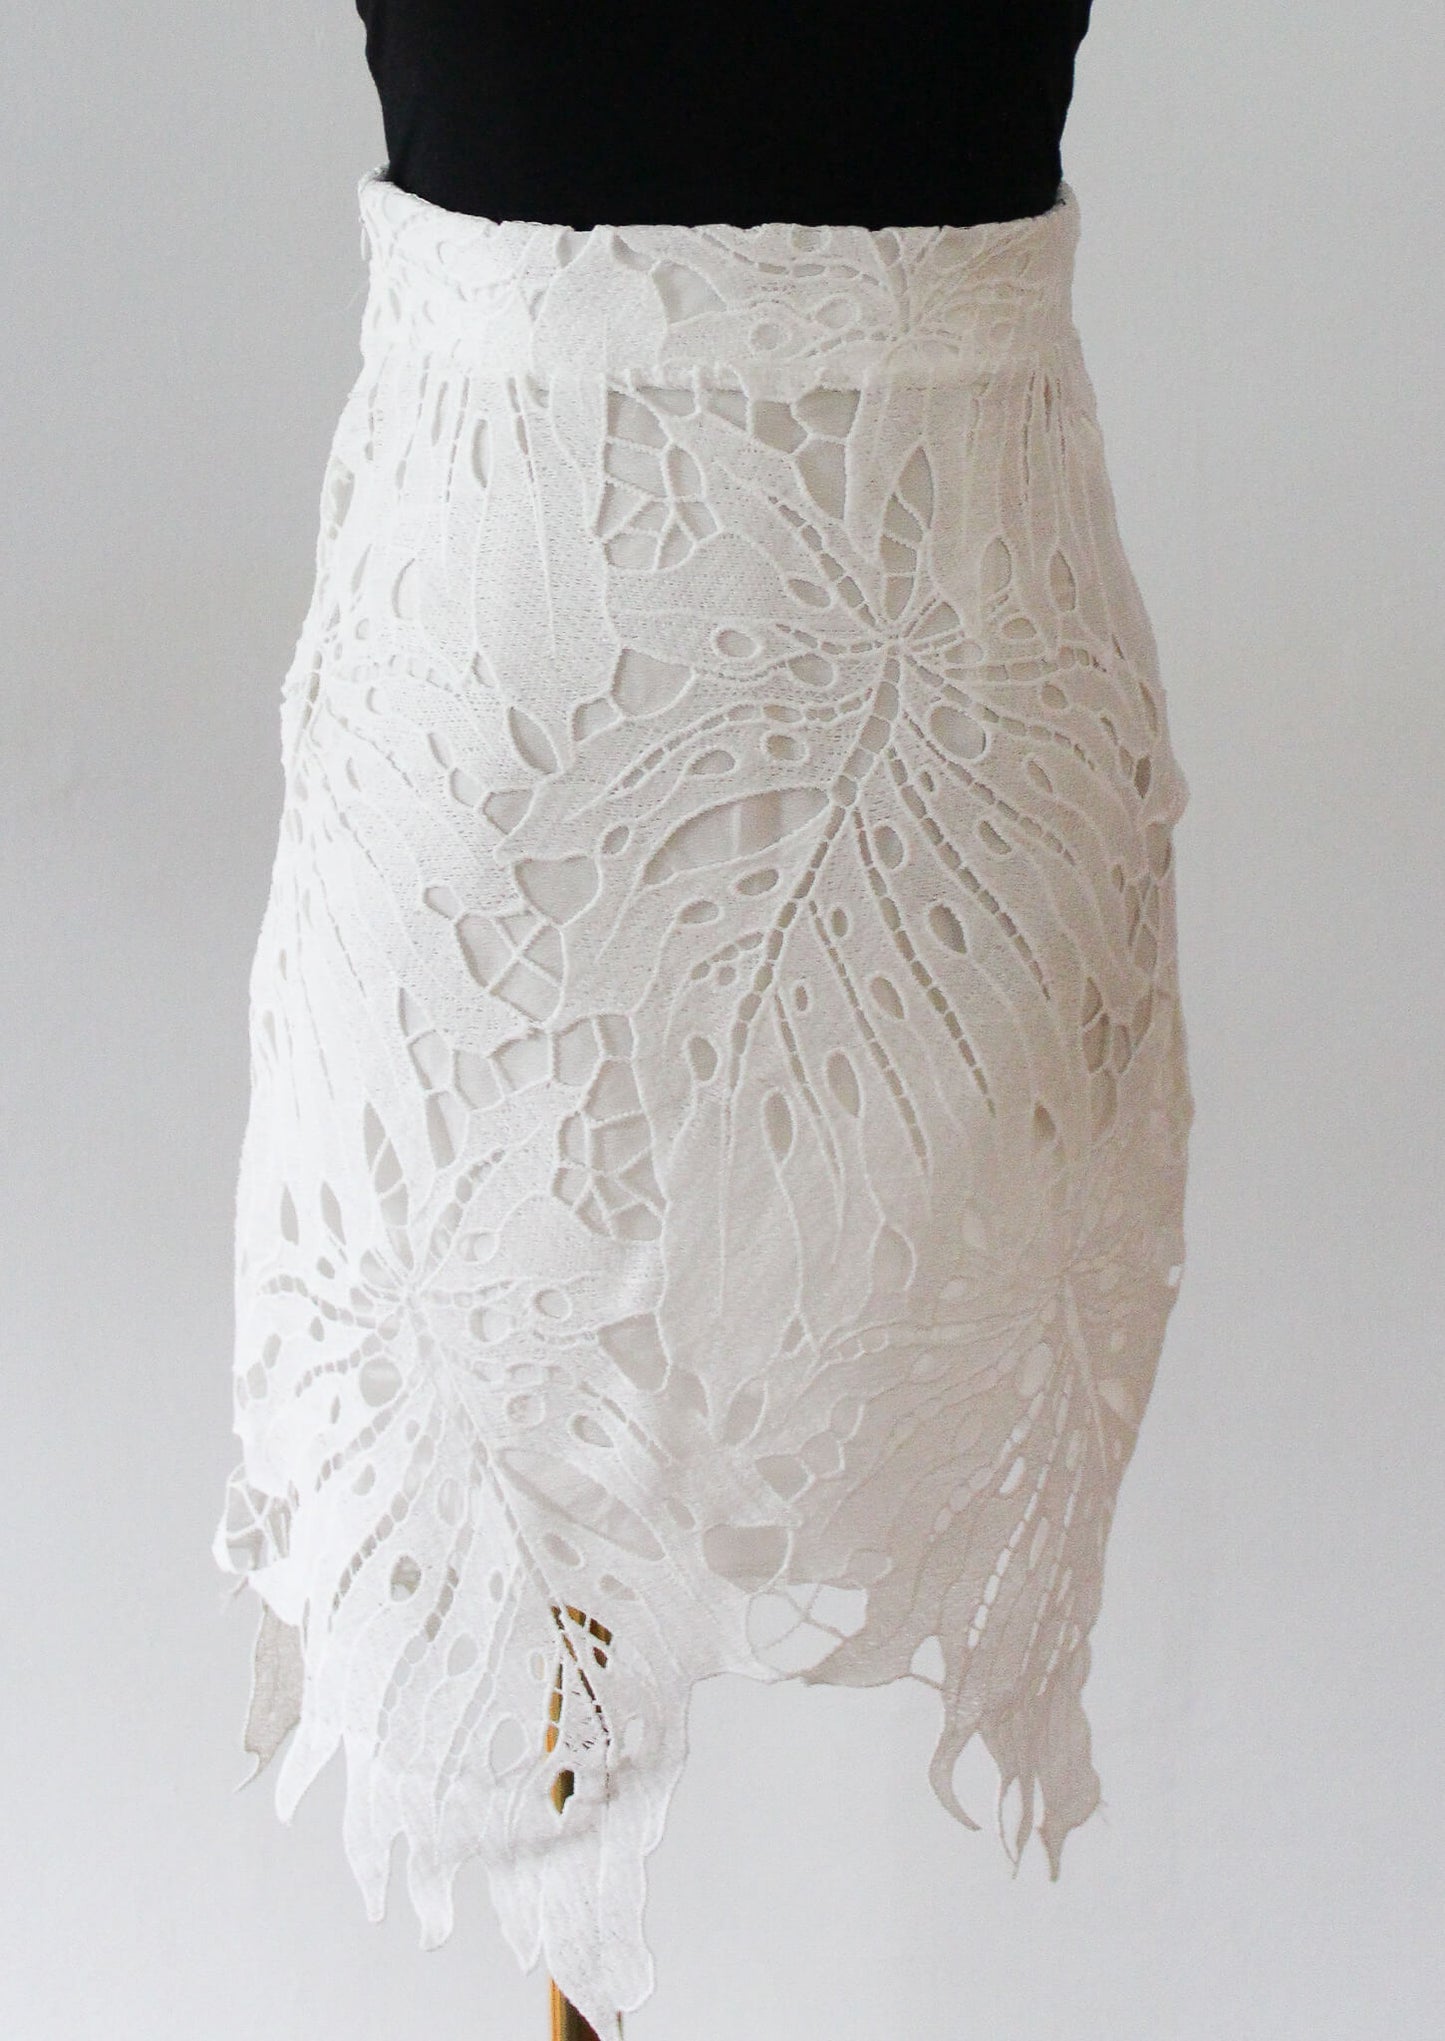 Lace fitted mid length skirt with hidden zipper